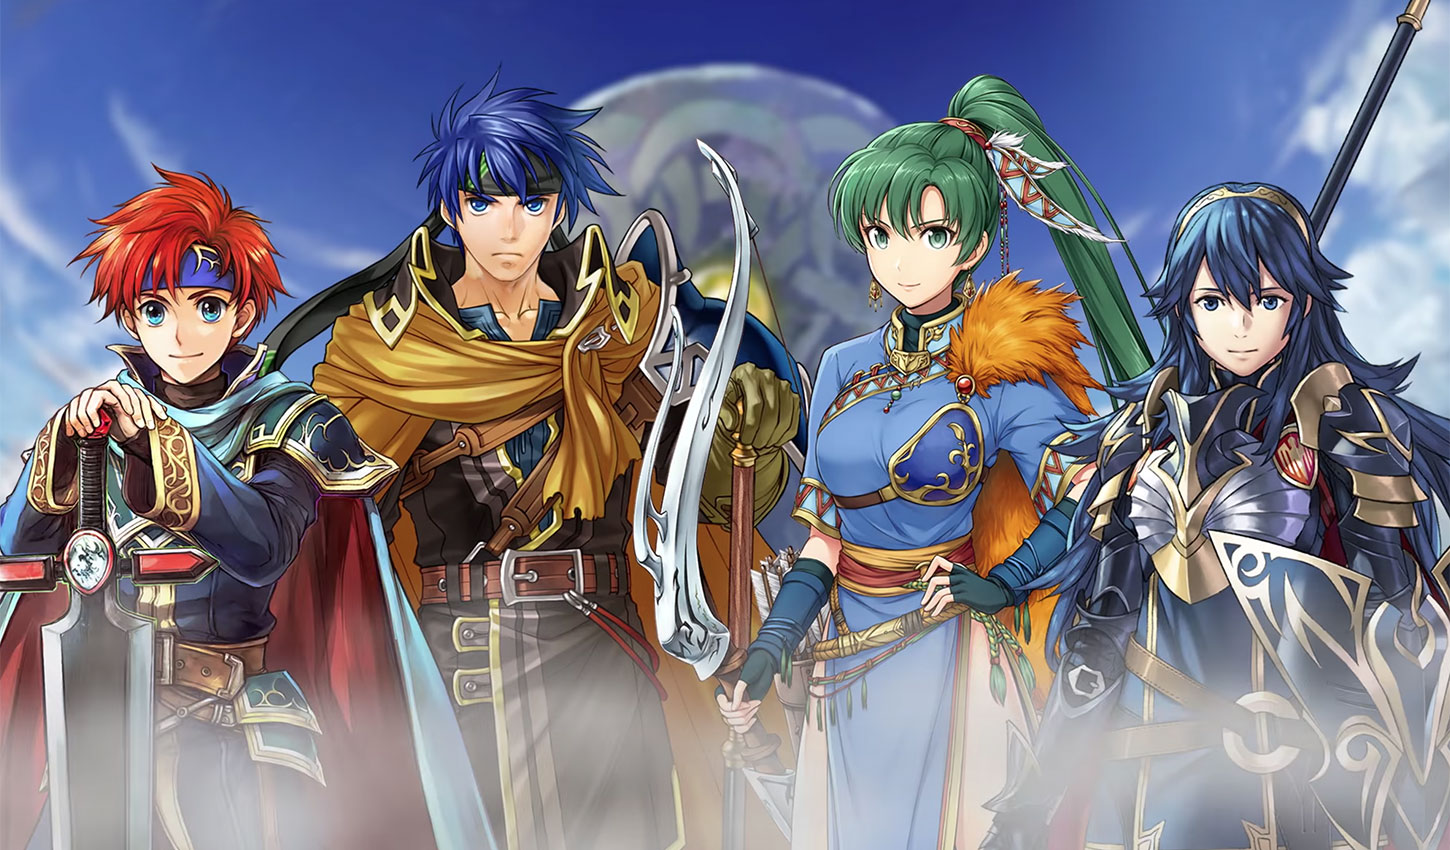 The Fire Emblem series ranked by DigitallyDownloaded.net